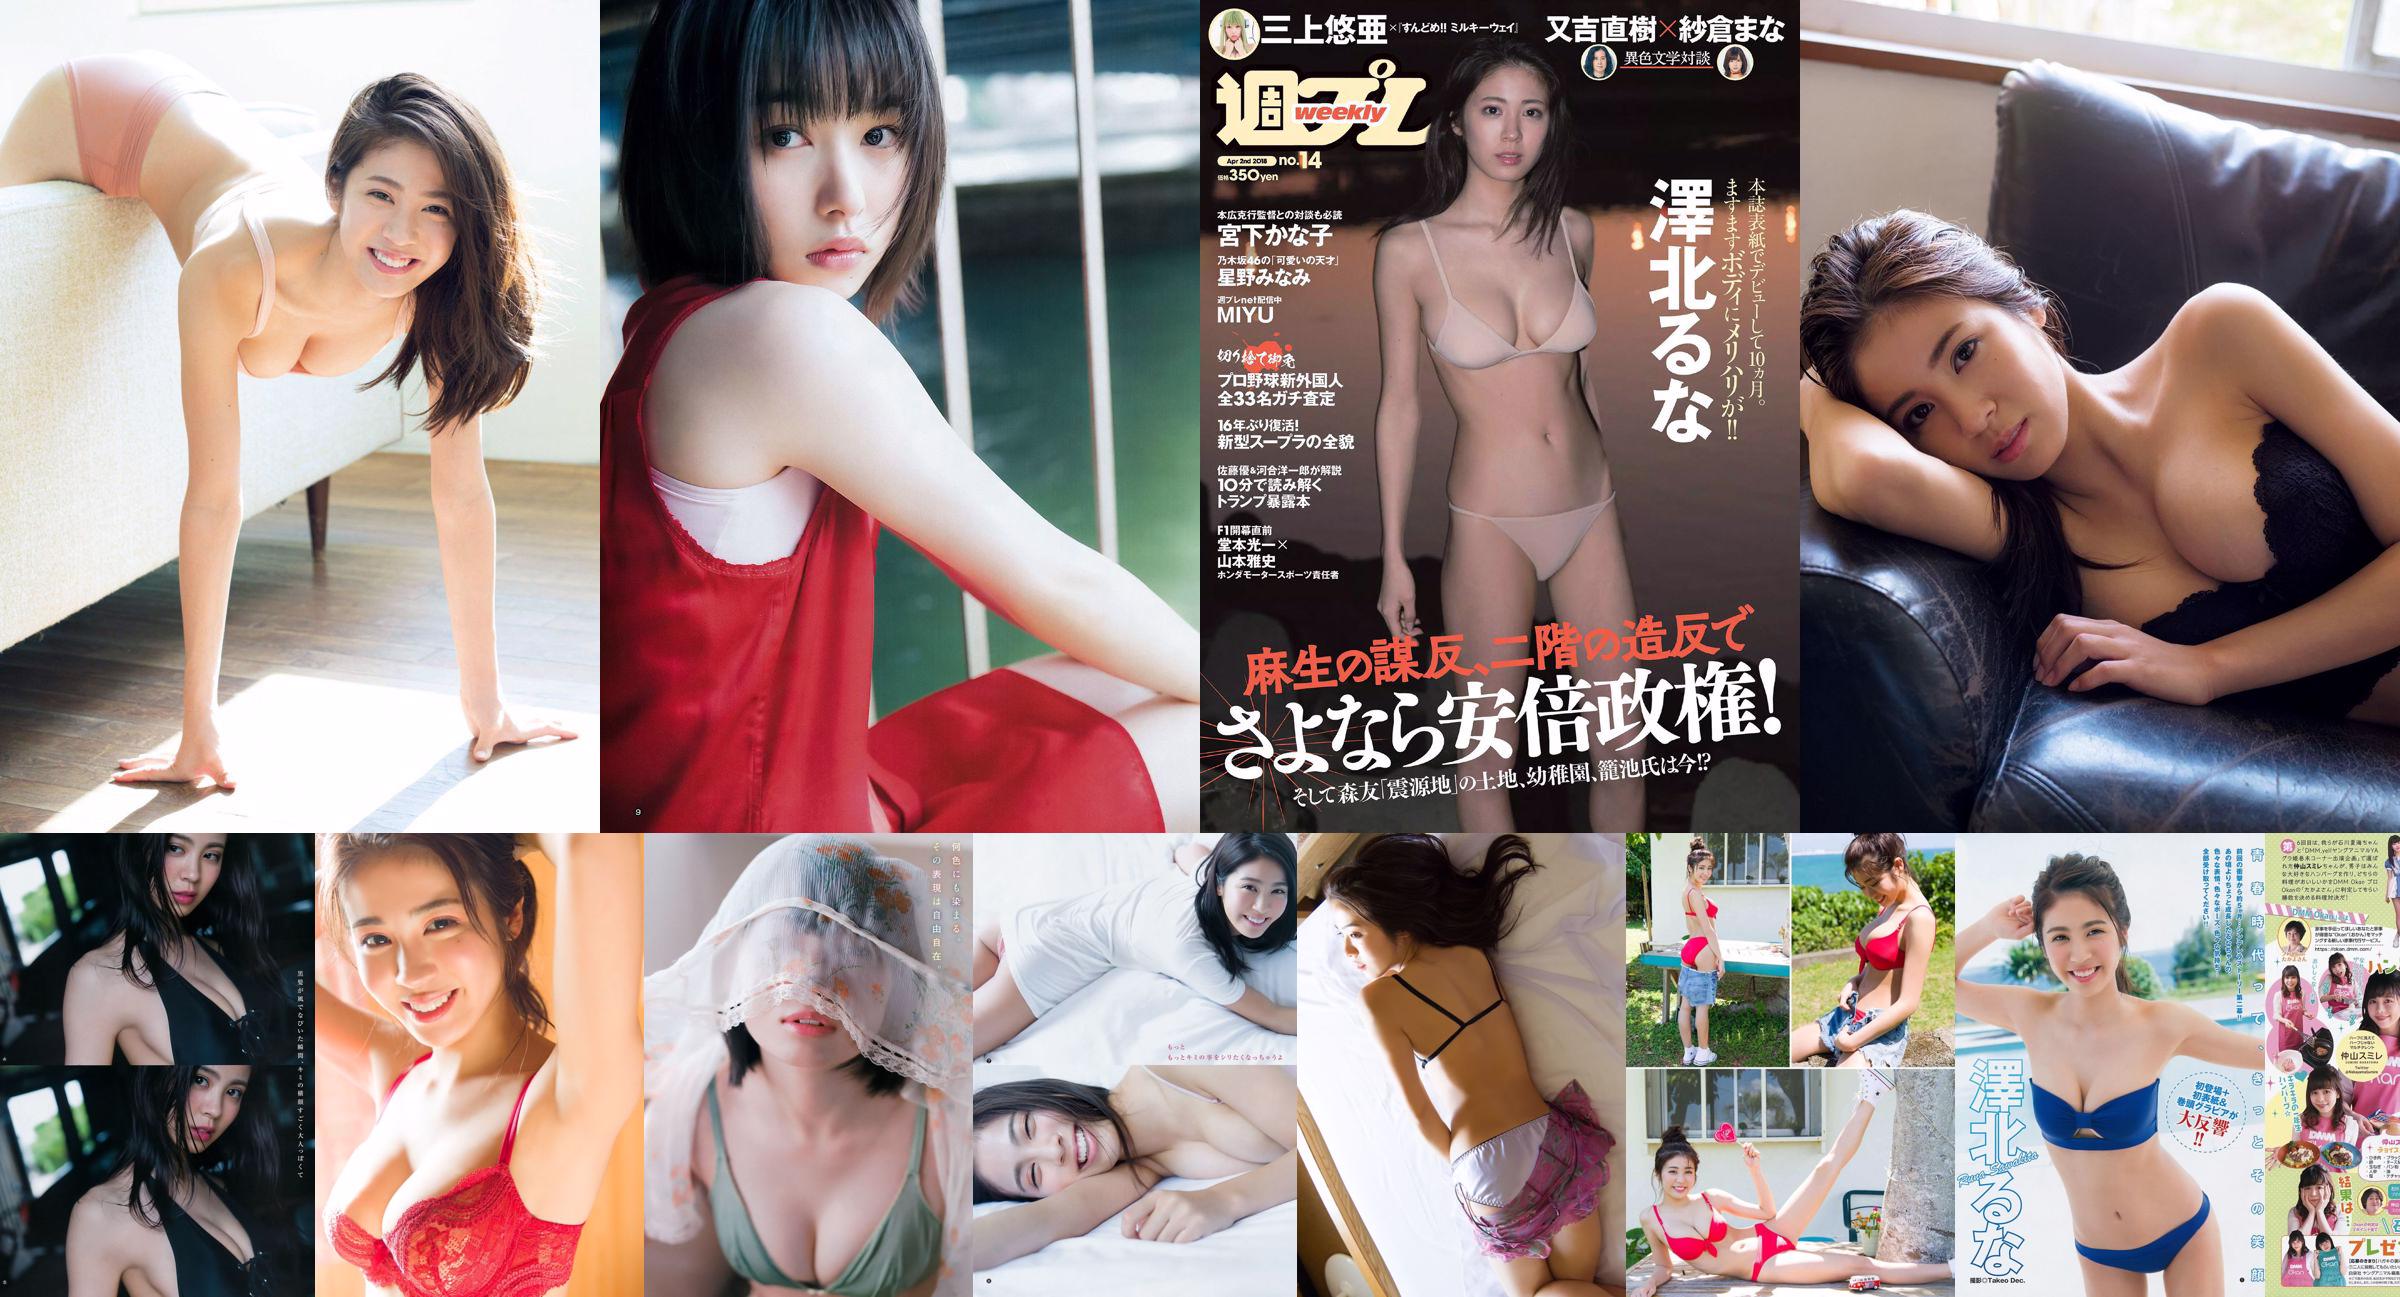 [FRIDAY] Luna Sawakita << "Beauty bust spills!" A little naughty sea camp (with video) >> Photo No.95d879 Page 1